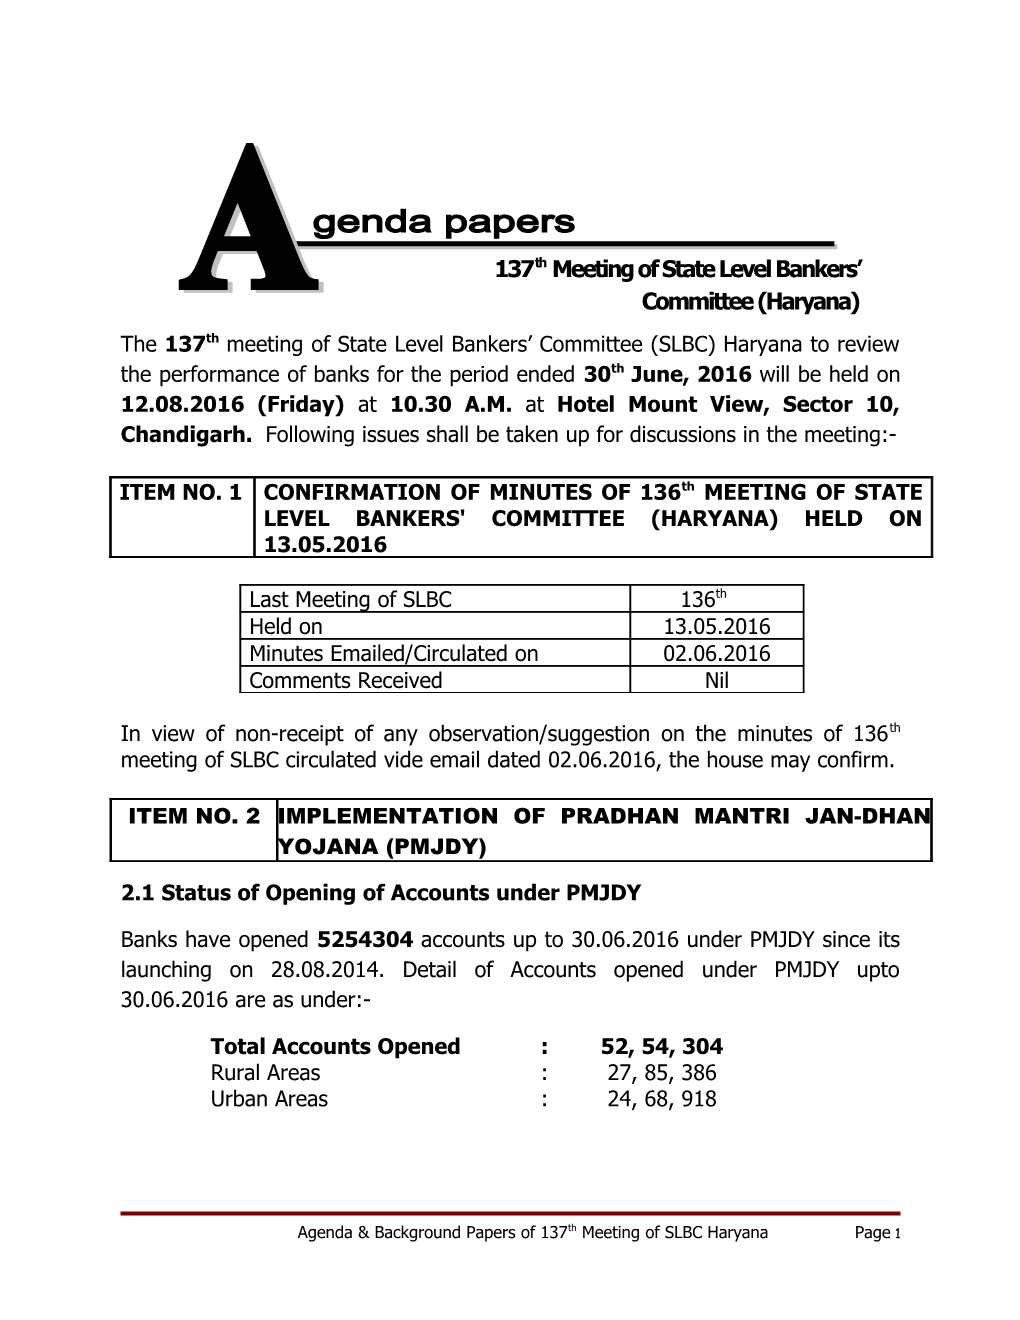 2.1 Status of Opening of Accounts Under PMJDY